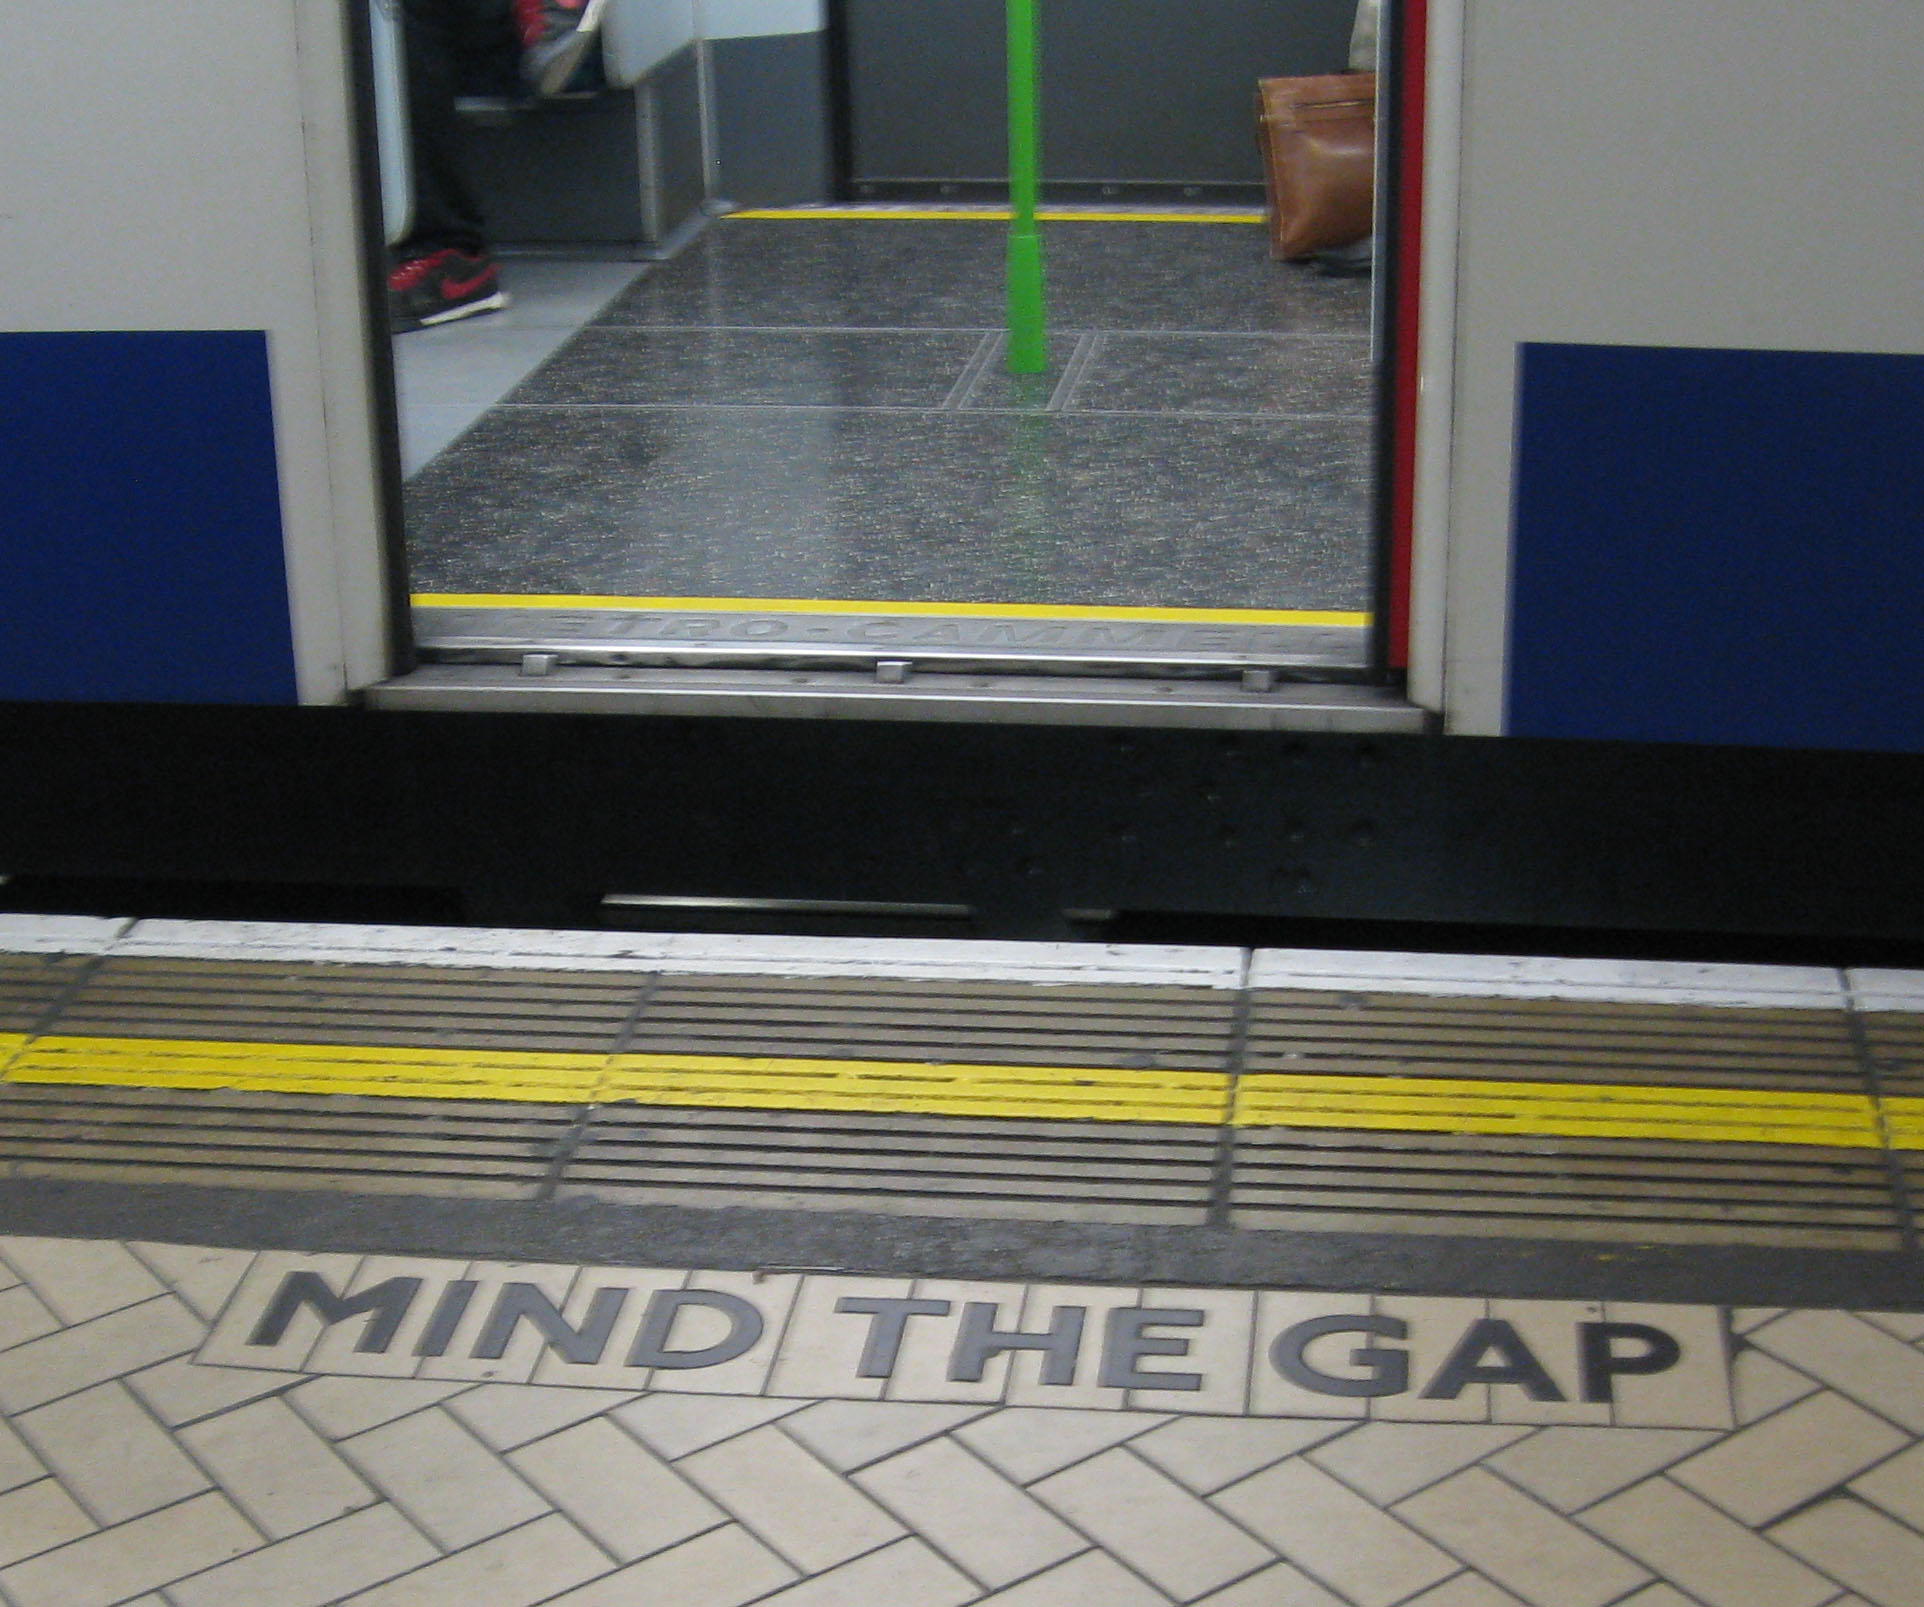 "Mind the gap" shaped tiling on the District line platform at Victoria station, by WillMcC